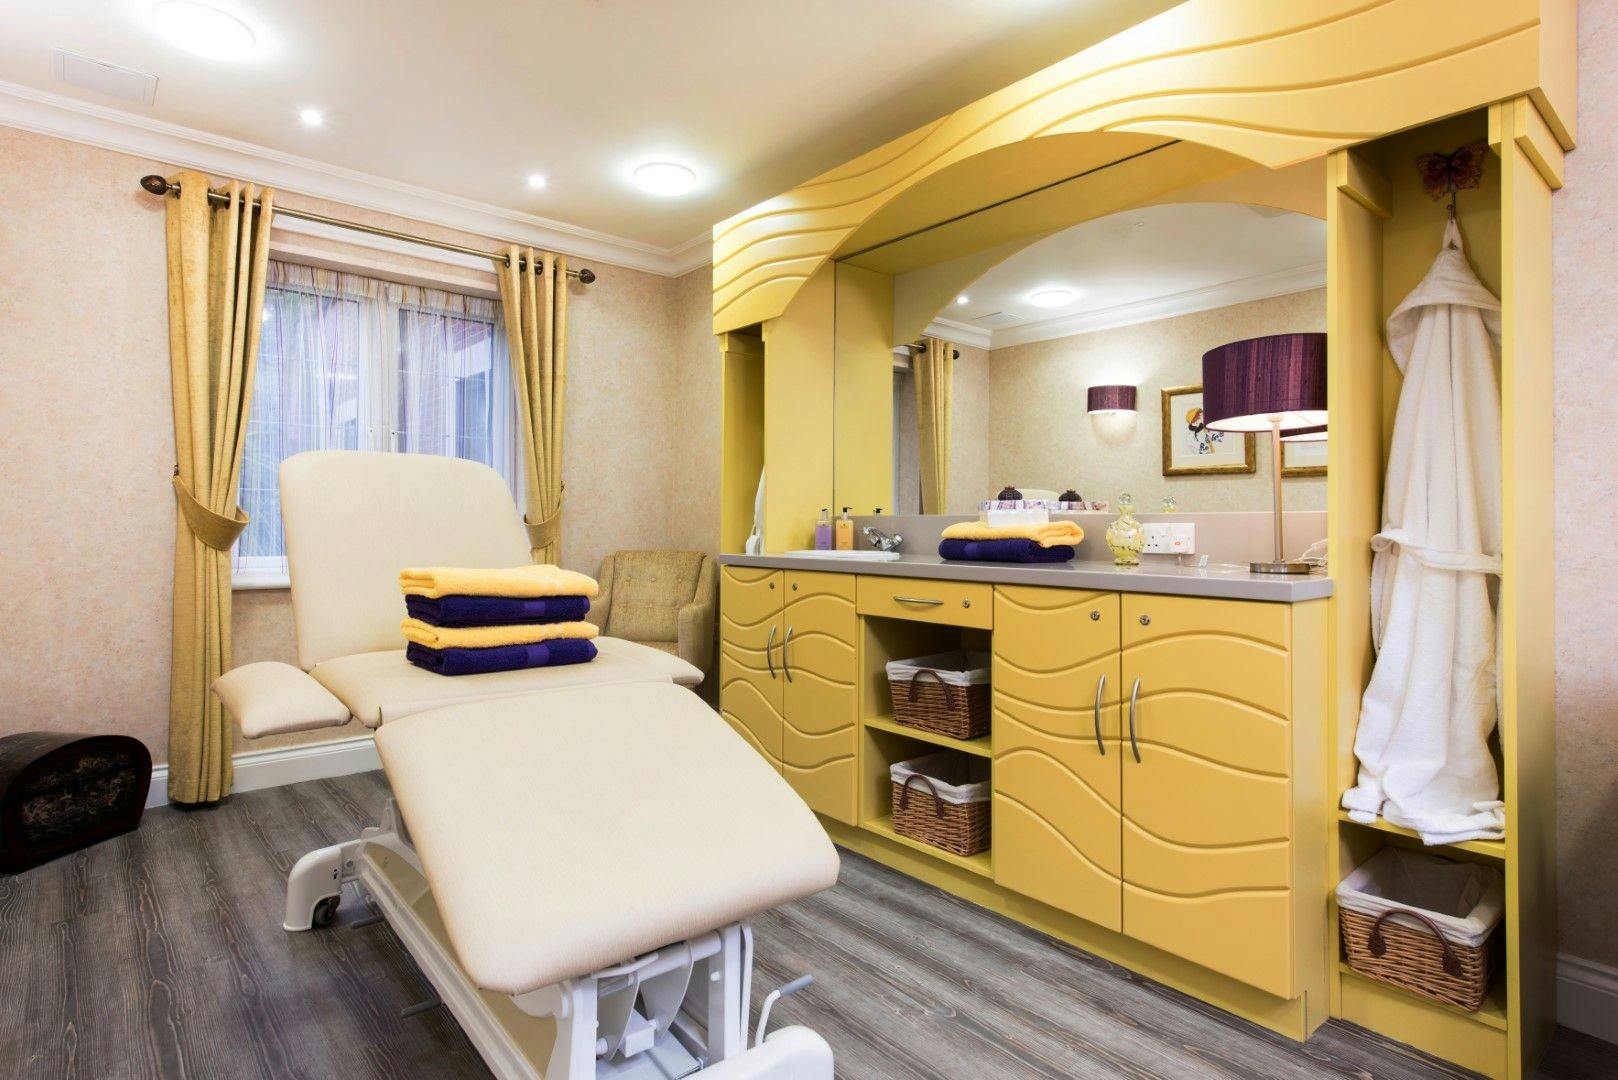 Spa at Anya court Care Home in Rugby, Warwickshire